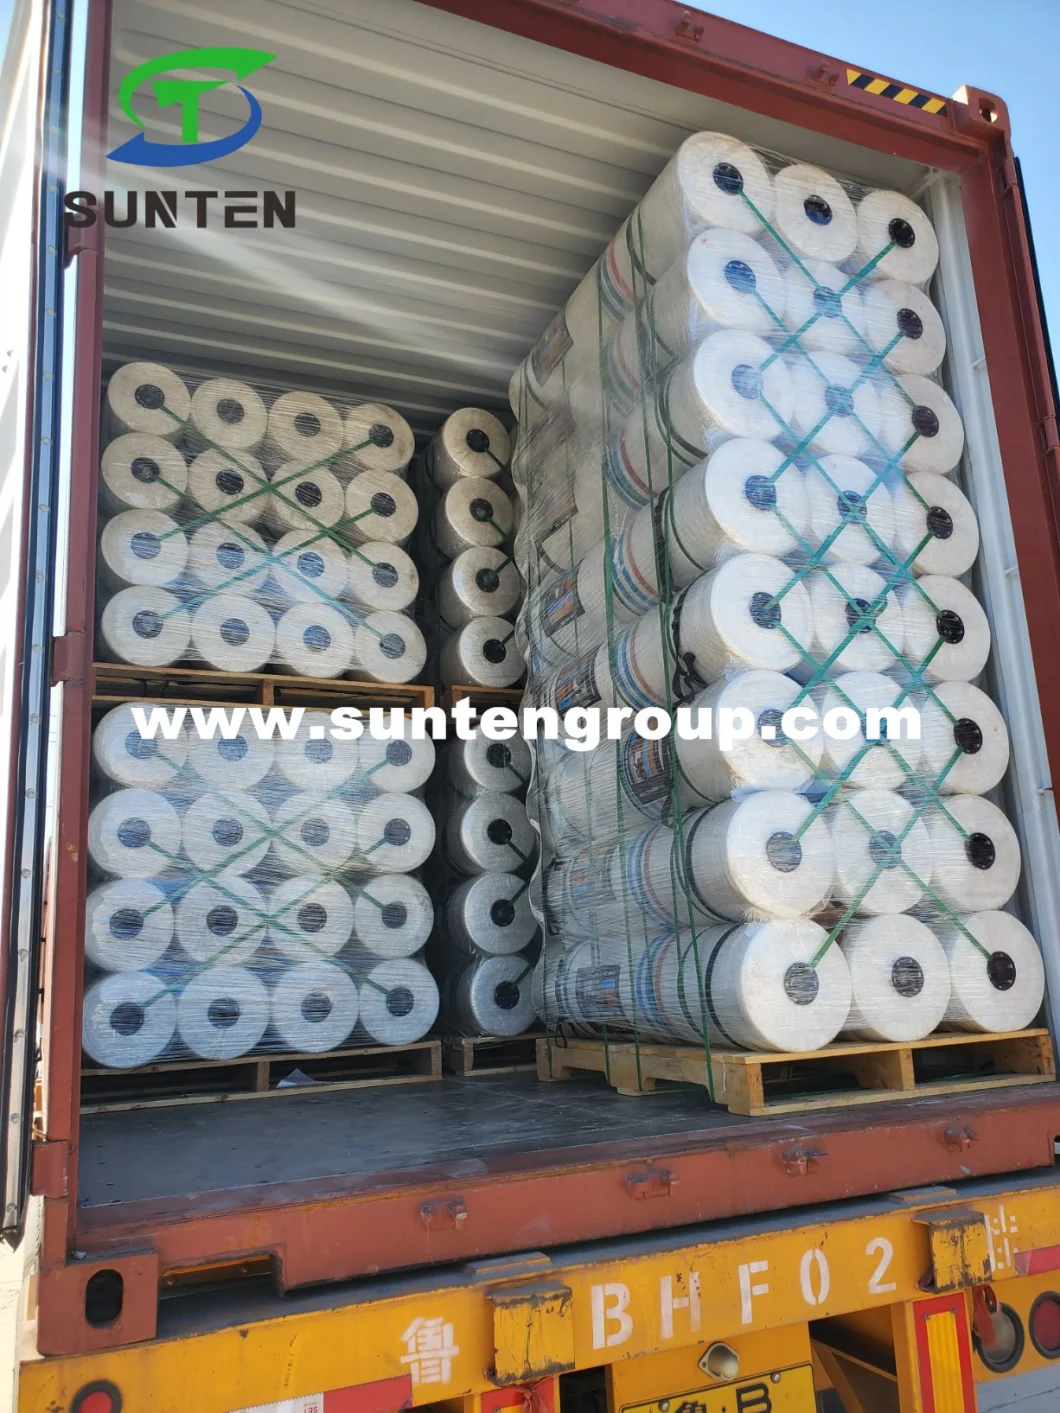 PE/Polyethylene/PP/Plastic/Agricultural White Packing Round Silage/Grass Hay Bale/Bales Net Wrap for South America (Suriname, Argentina...)